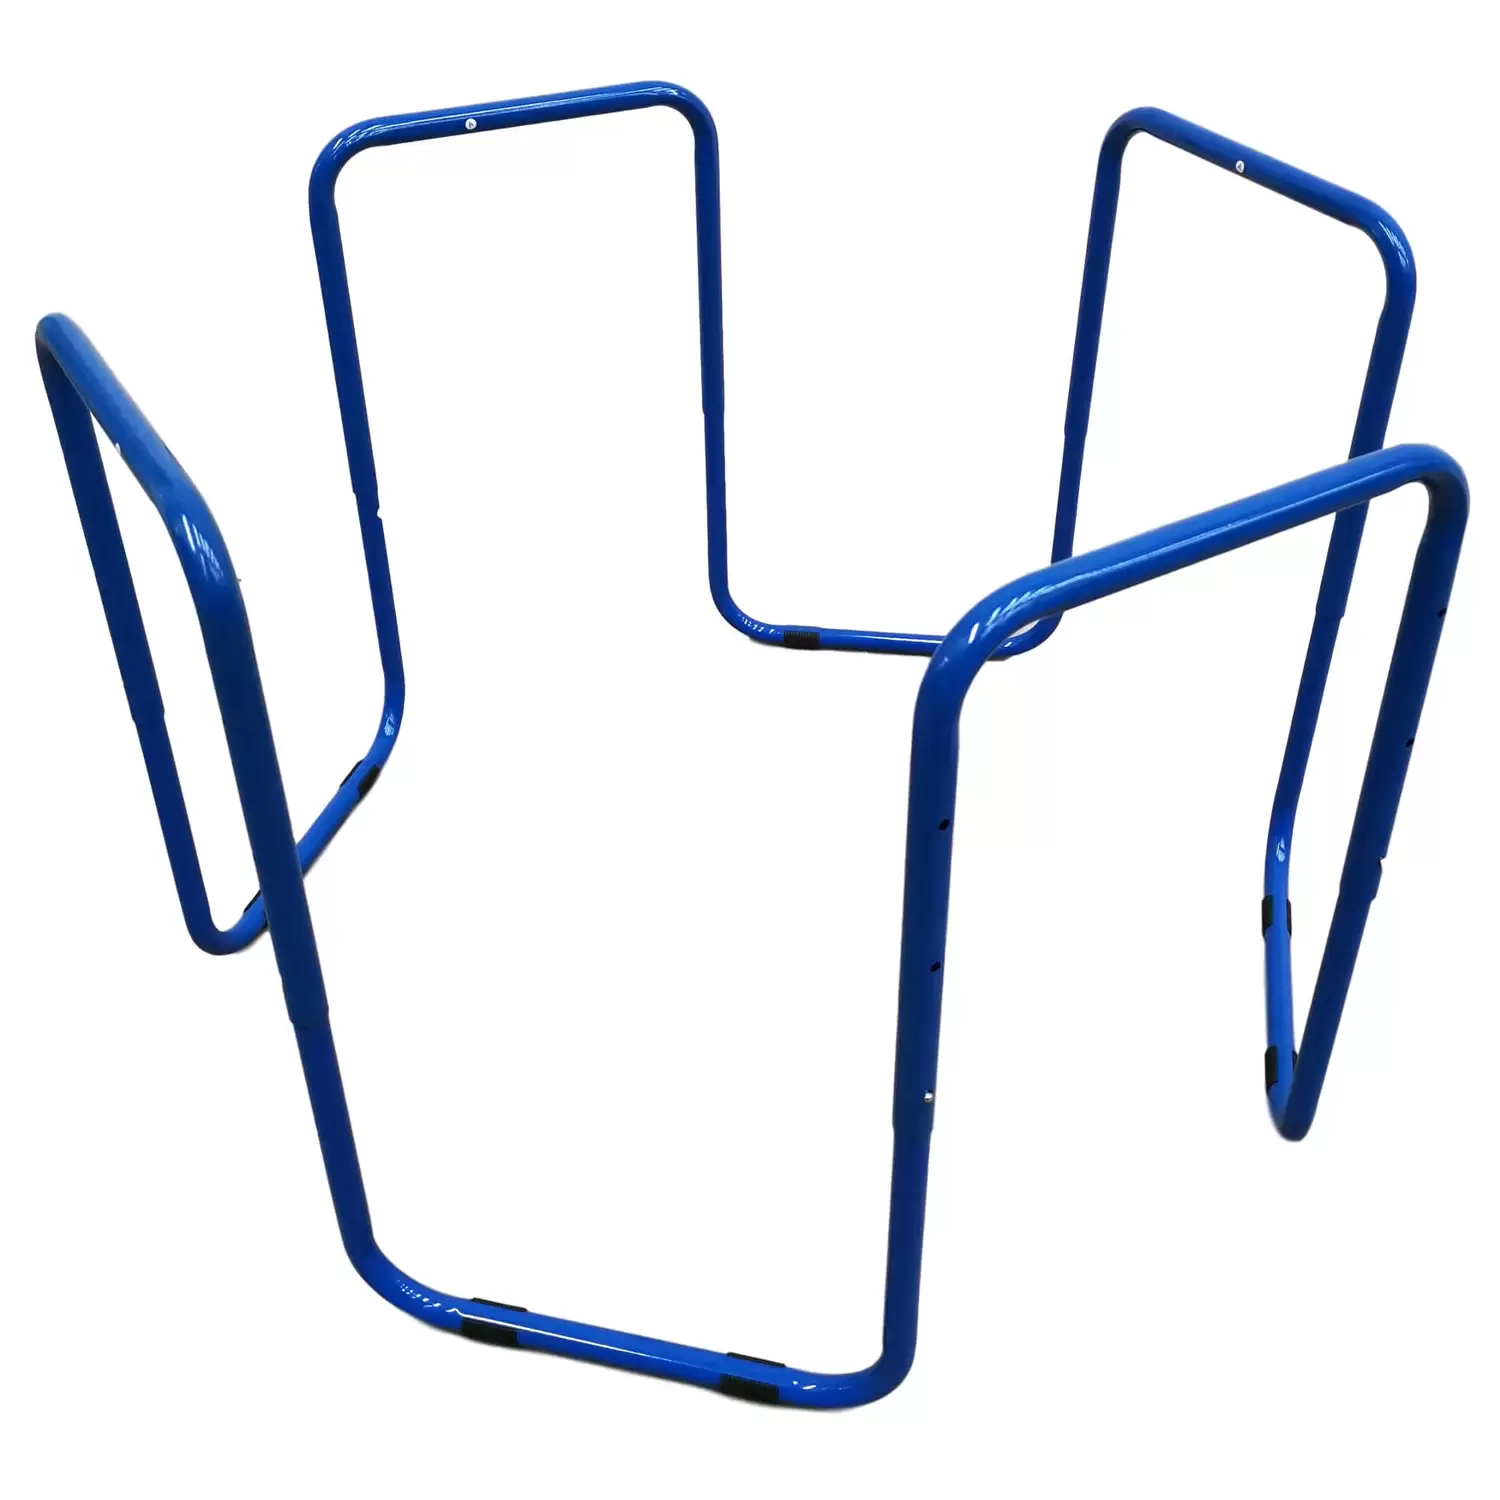 Gompels Tuff Tray Frame Blue - Gompels - Care & Nursery Supply Specialists